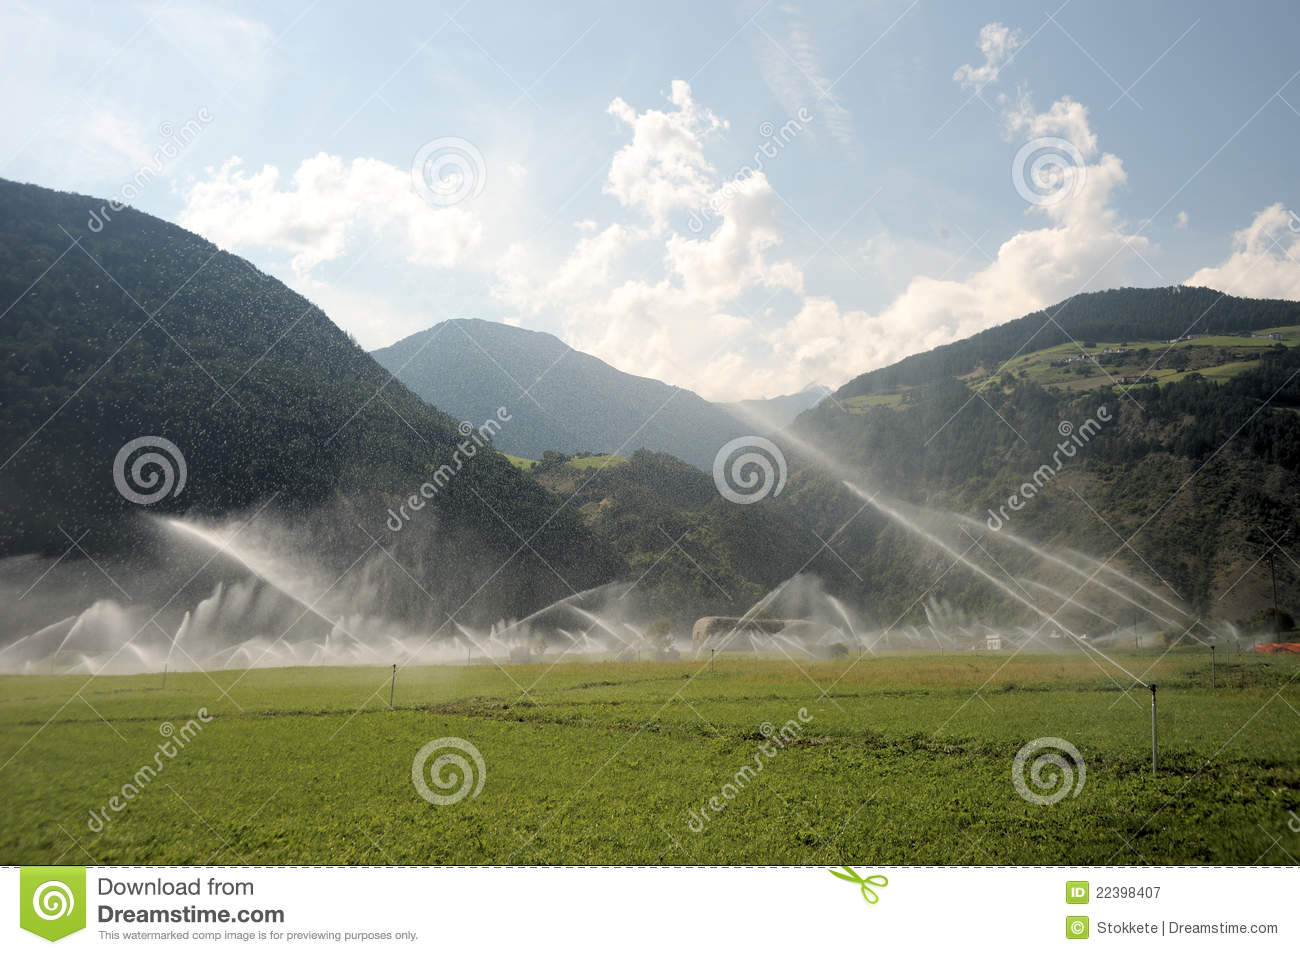 Water Sprinklers Royalty Free Stock Photography   Image  22398407